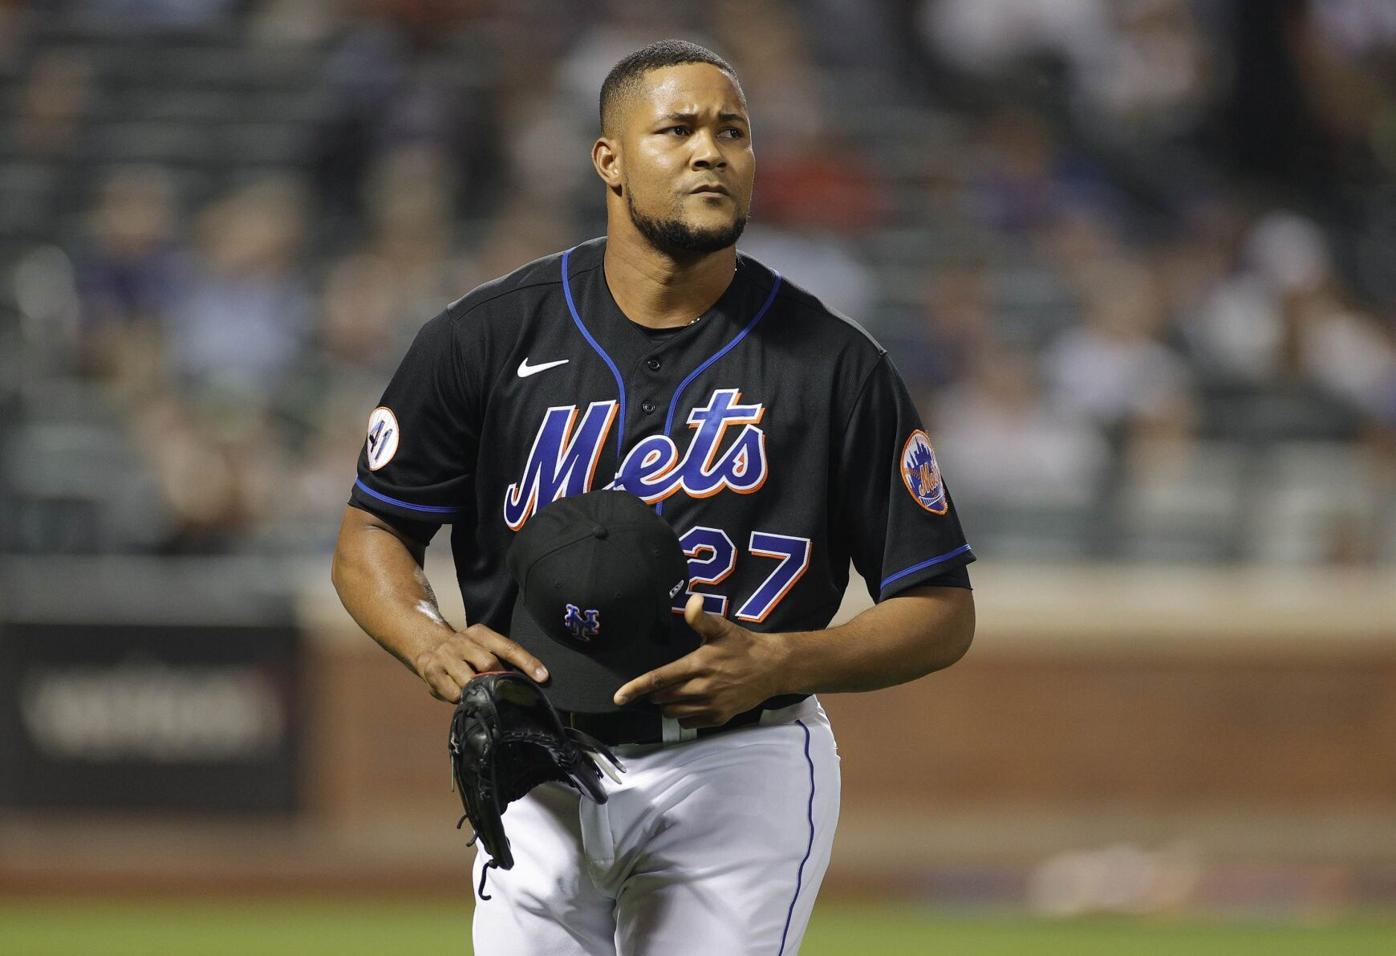 Jeurys Familia builds a house for his family in Dominican Republic